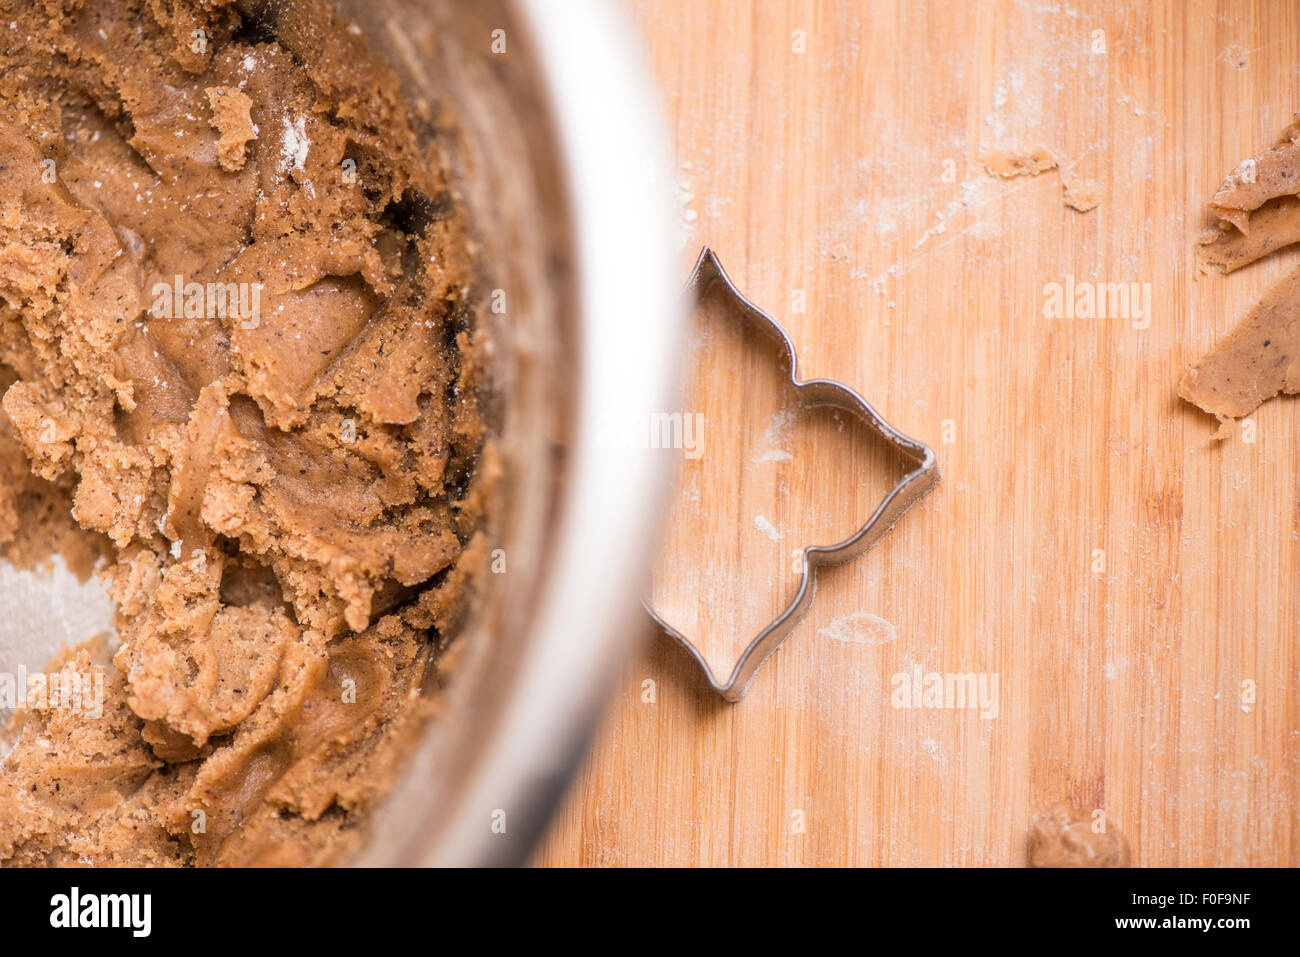 Bowl with ginger bread cookie dough and cookie cutter on wooden cutting board. Stock Photo